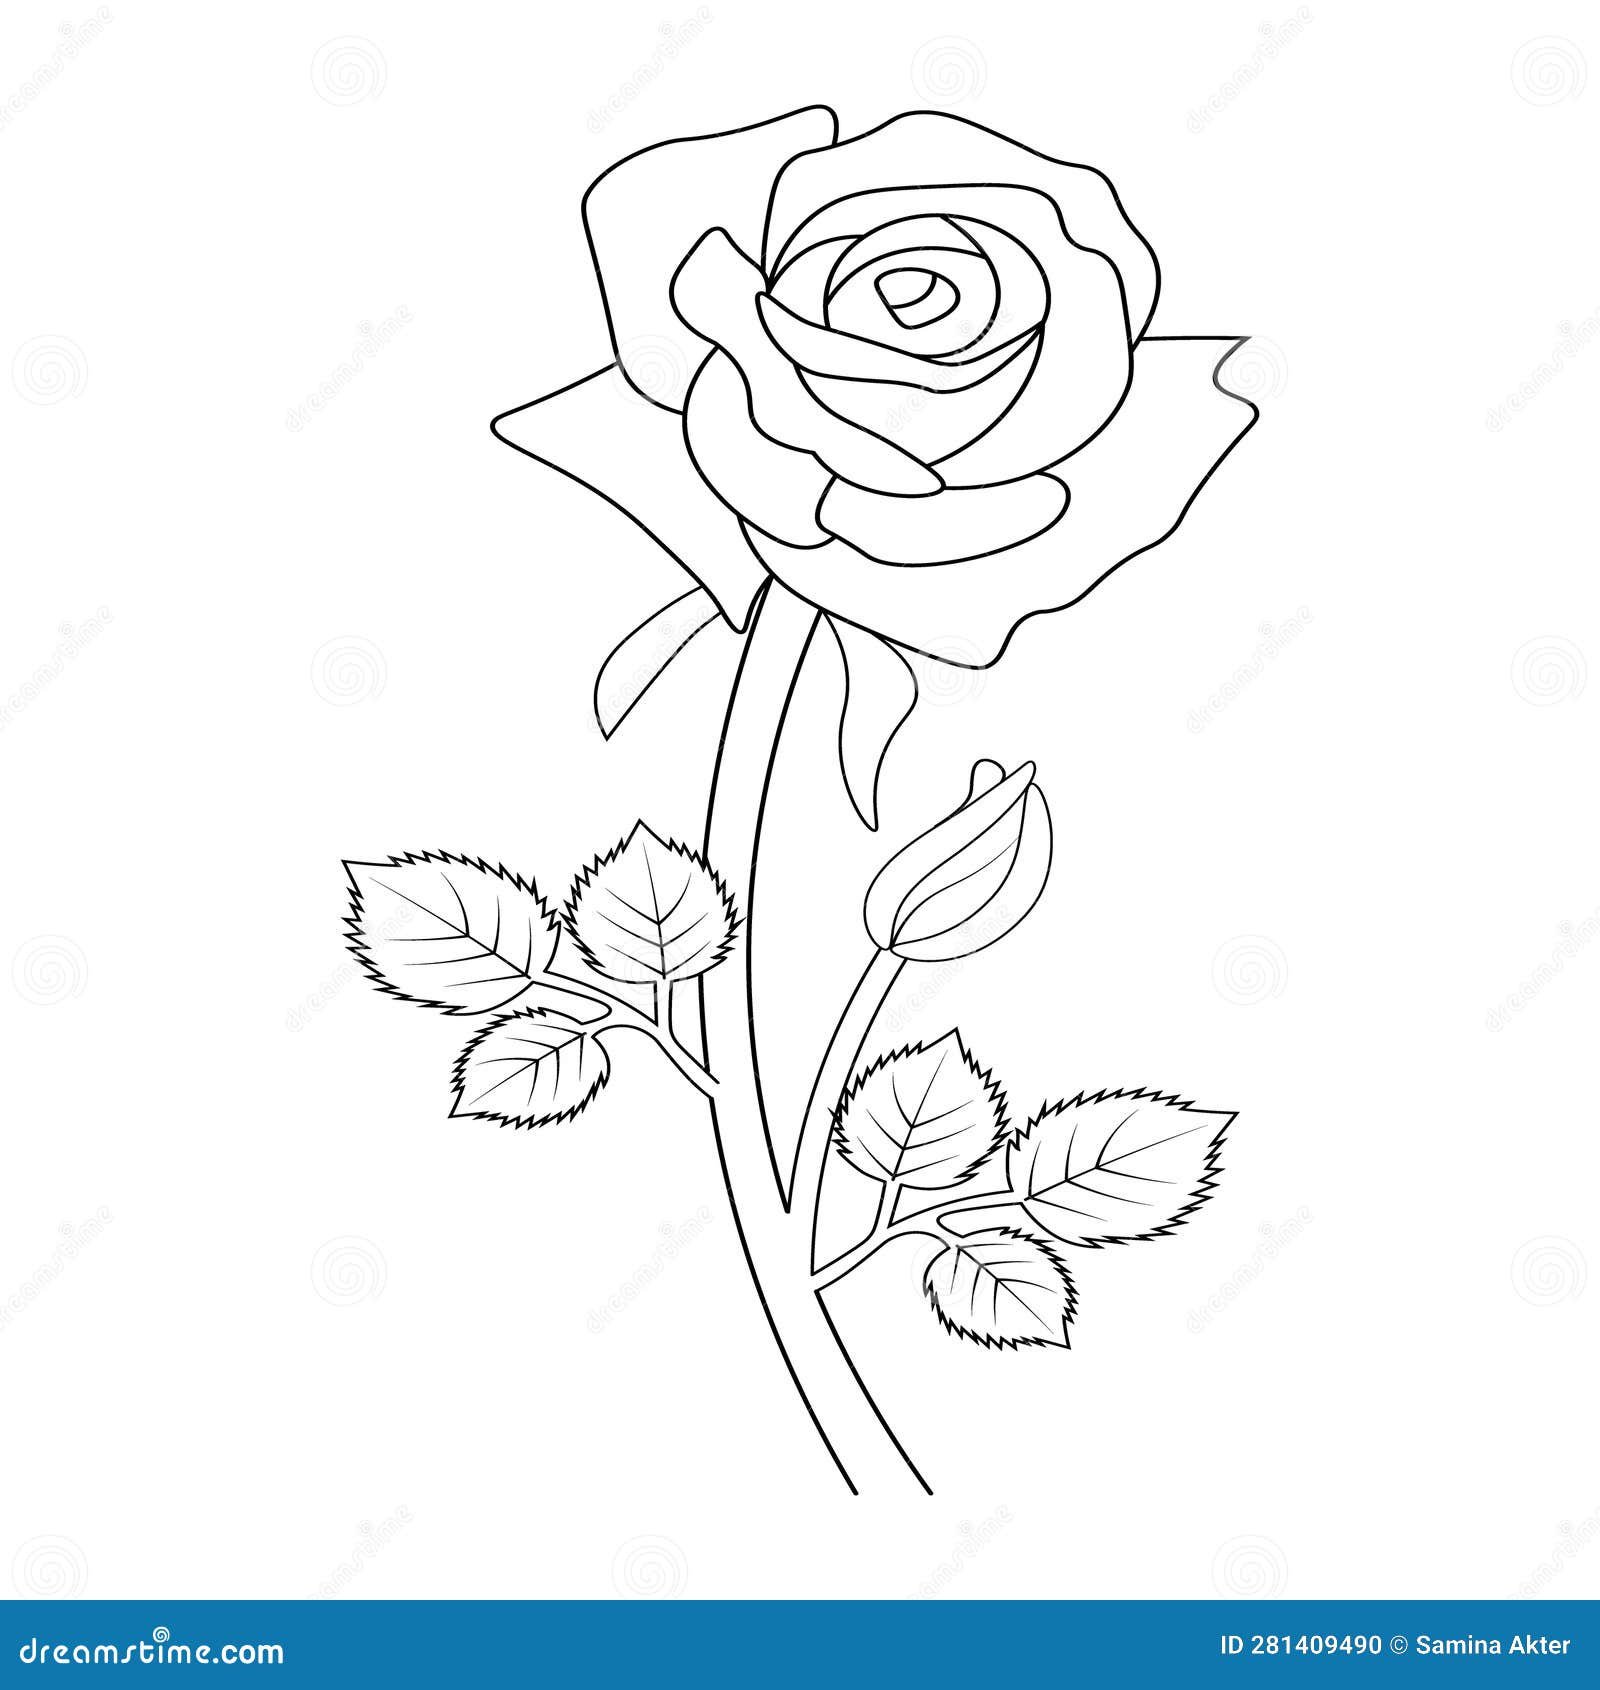 Free: Download Rose Clip Art - Beginner Rose Drawing Easy - nohat.cc-saigonsouth.com.vn